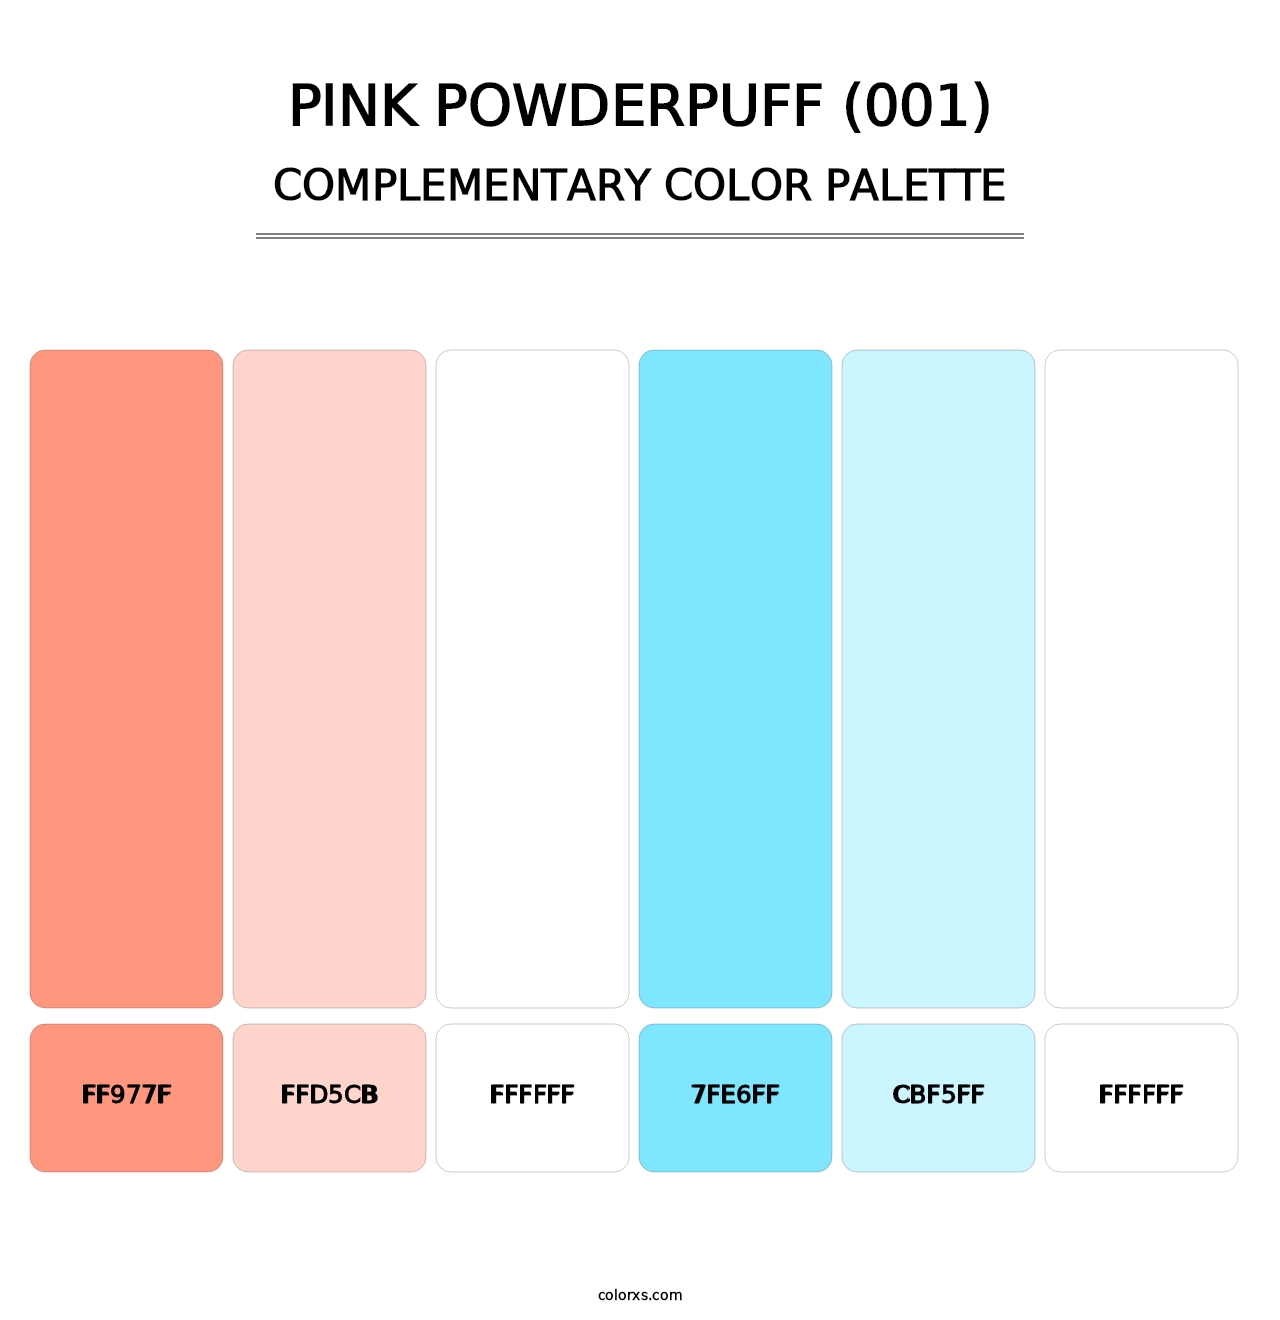 Pink Powderpuff (001) - Complementary Color Palette